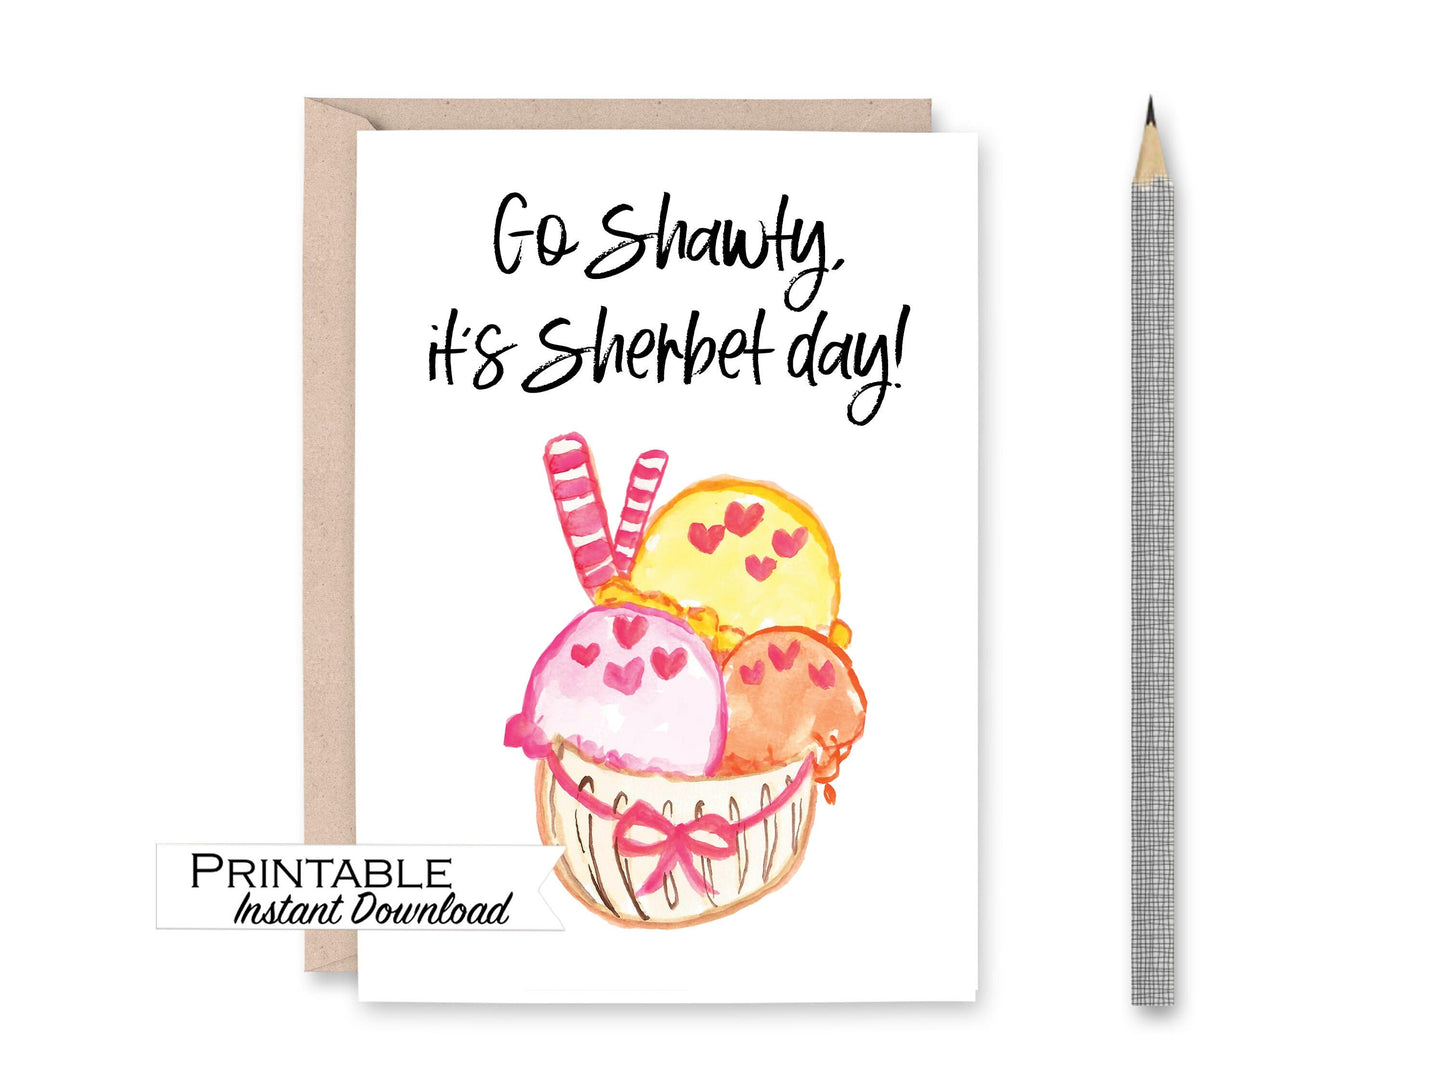 Go Shawty it's Sherbet Day Card Printable - Digital Download